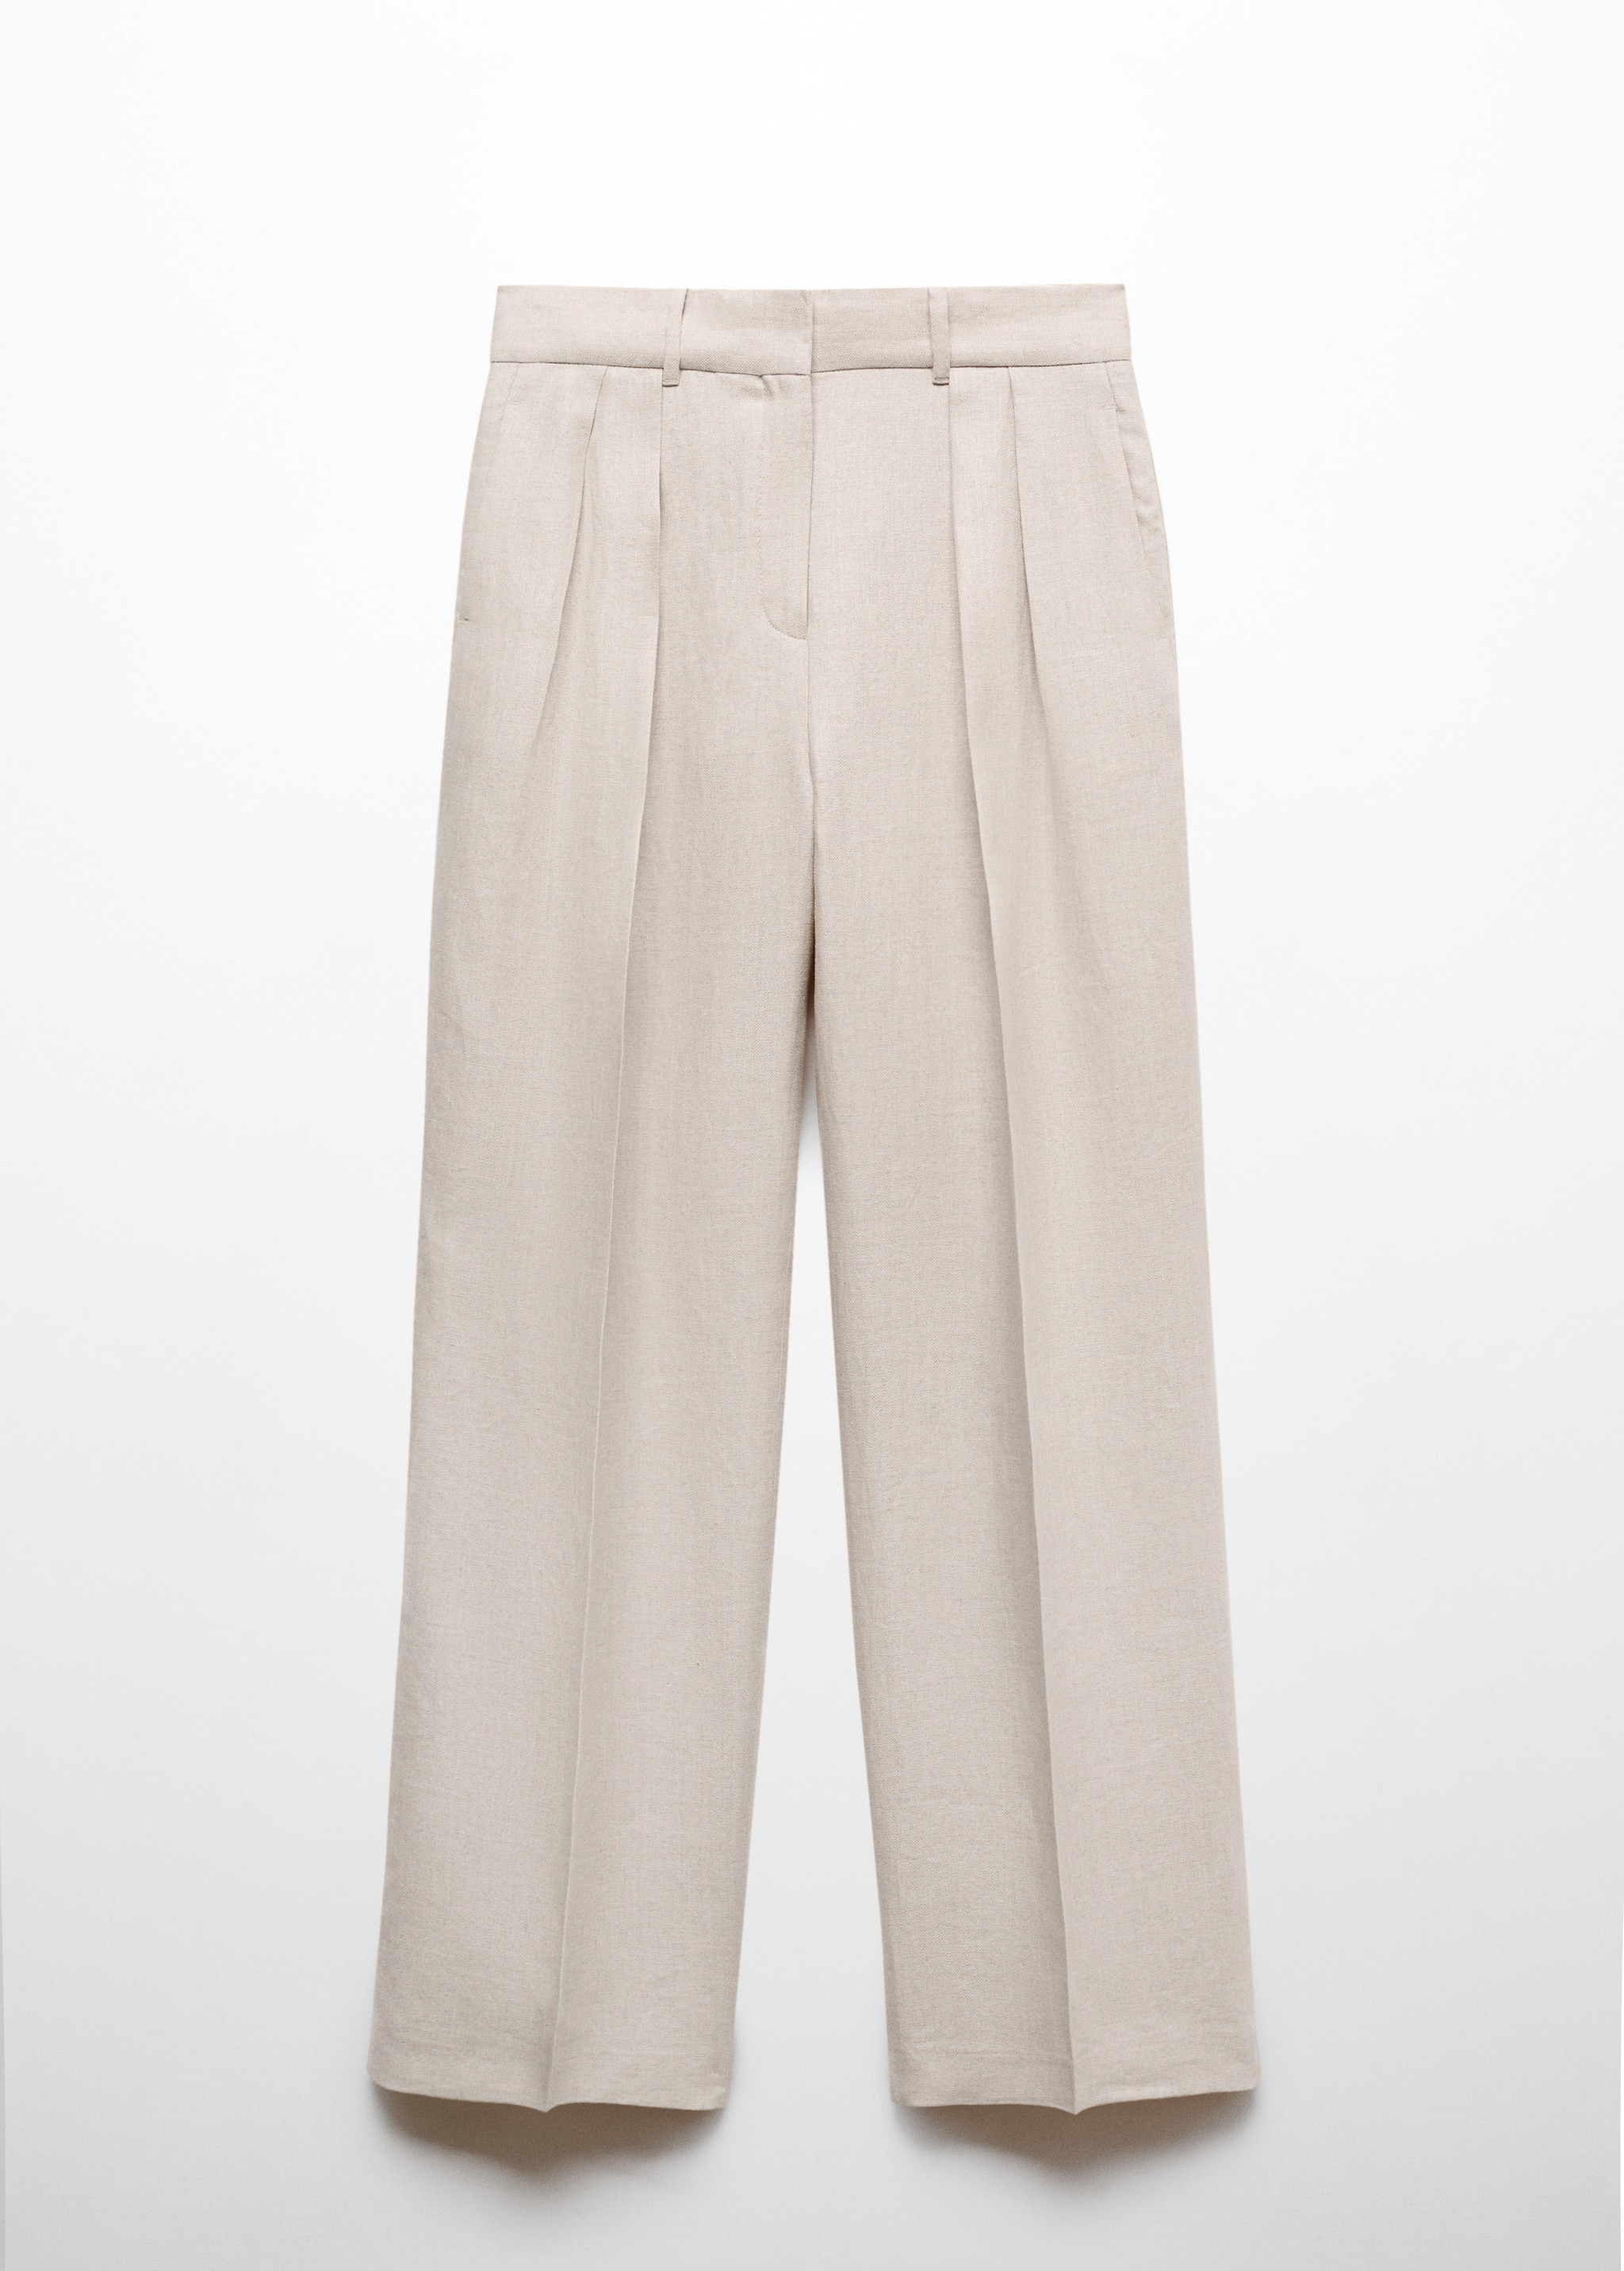 100% linen trousers with darts - Article without model